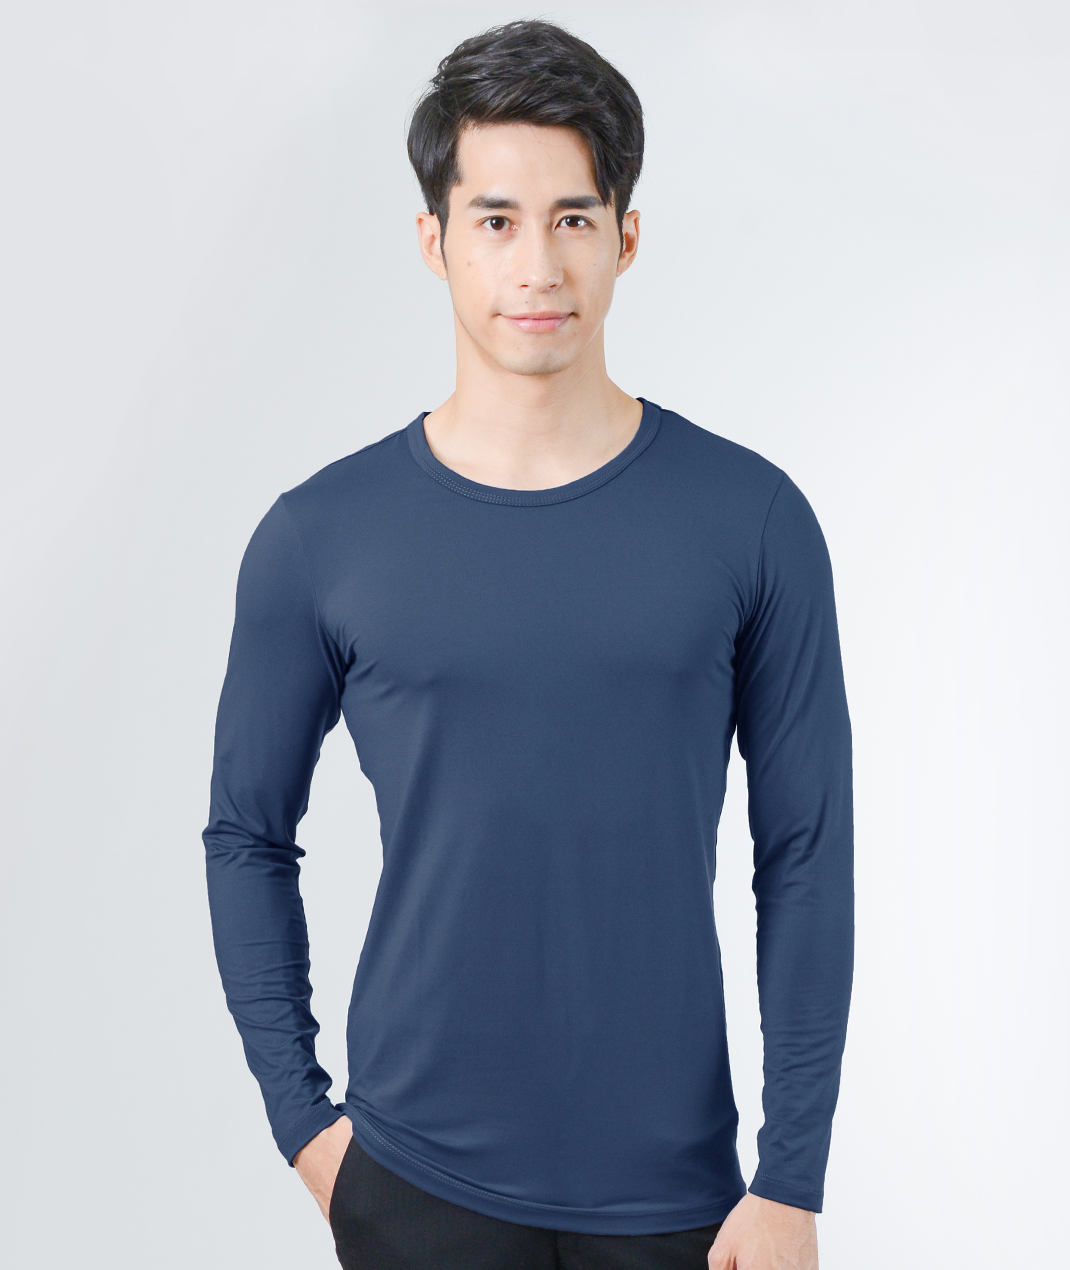 Thermal Long Sleeve Top Men UPF50+ Heat Rention Collection